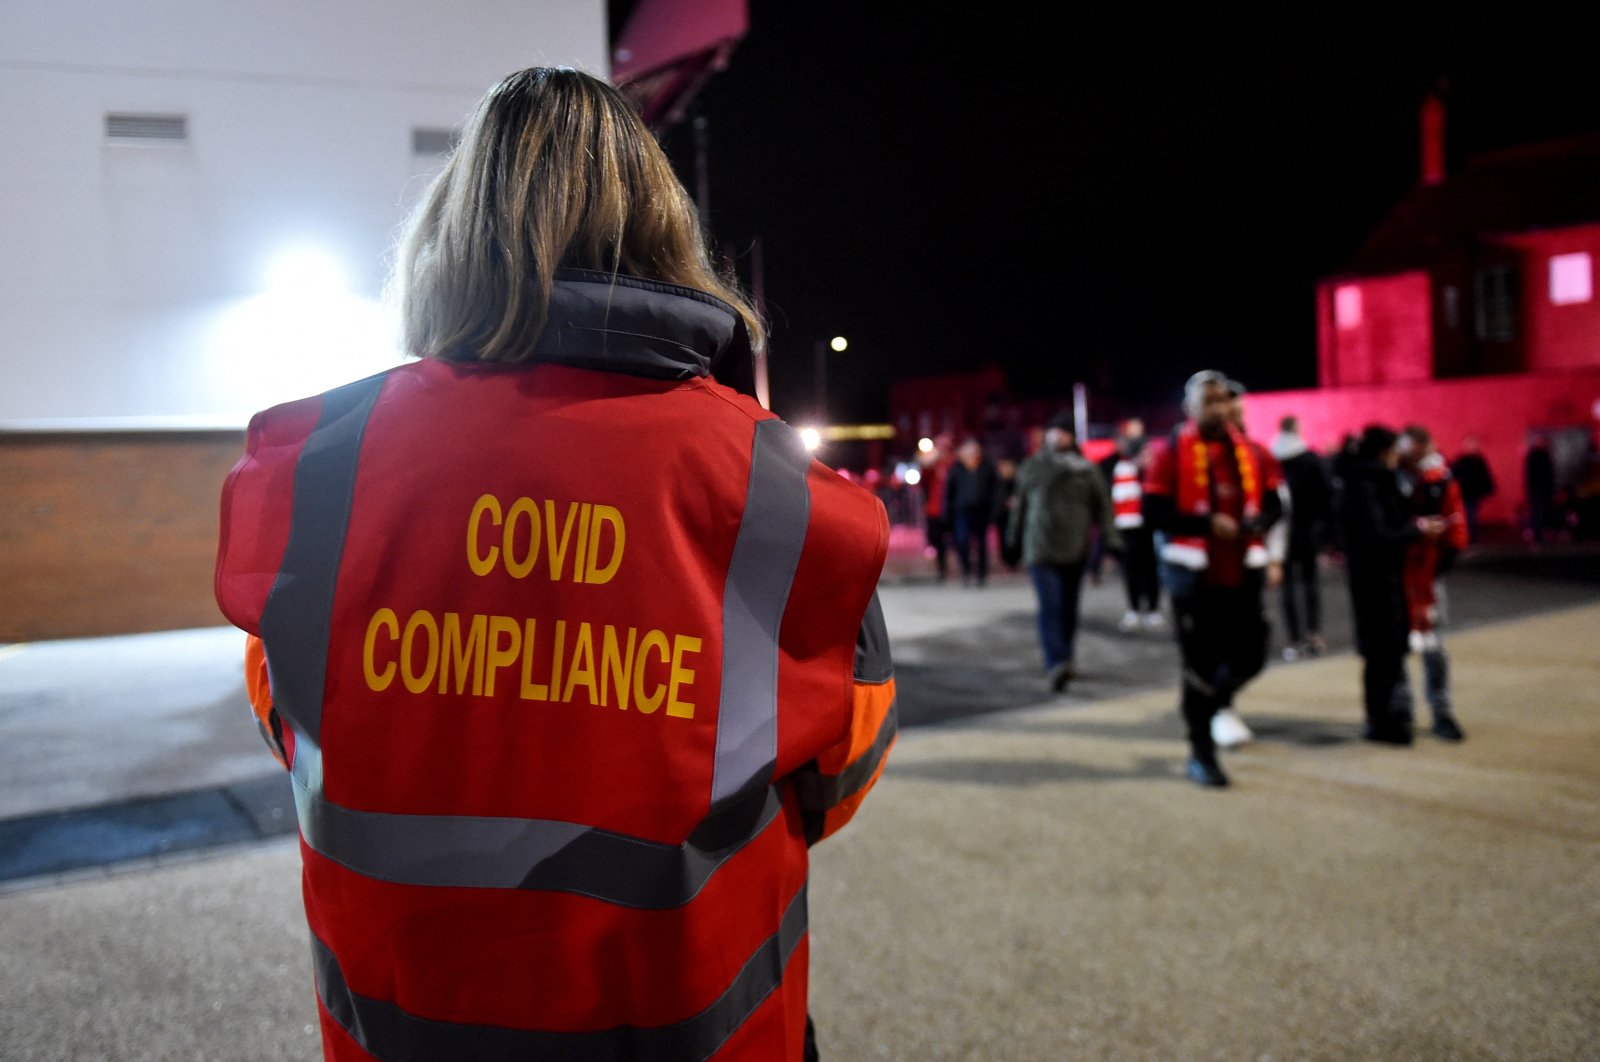 A member of the COVID-19 compliance team is seen outside Anfield before a Premier League match between Liverpool and Newcastle, Liverpool, England, Dec. 16, 2021. (Reuters Photo)